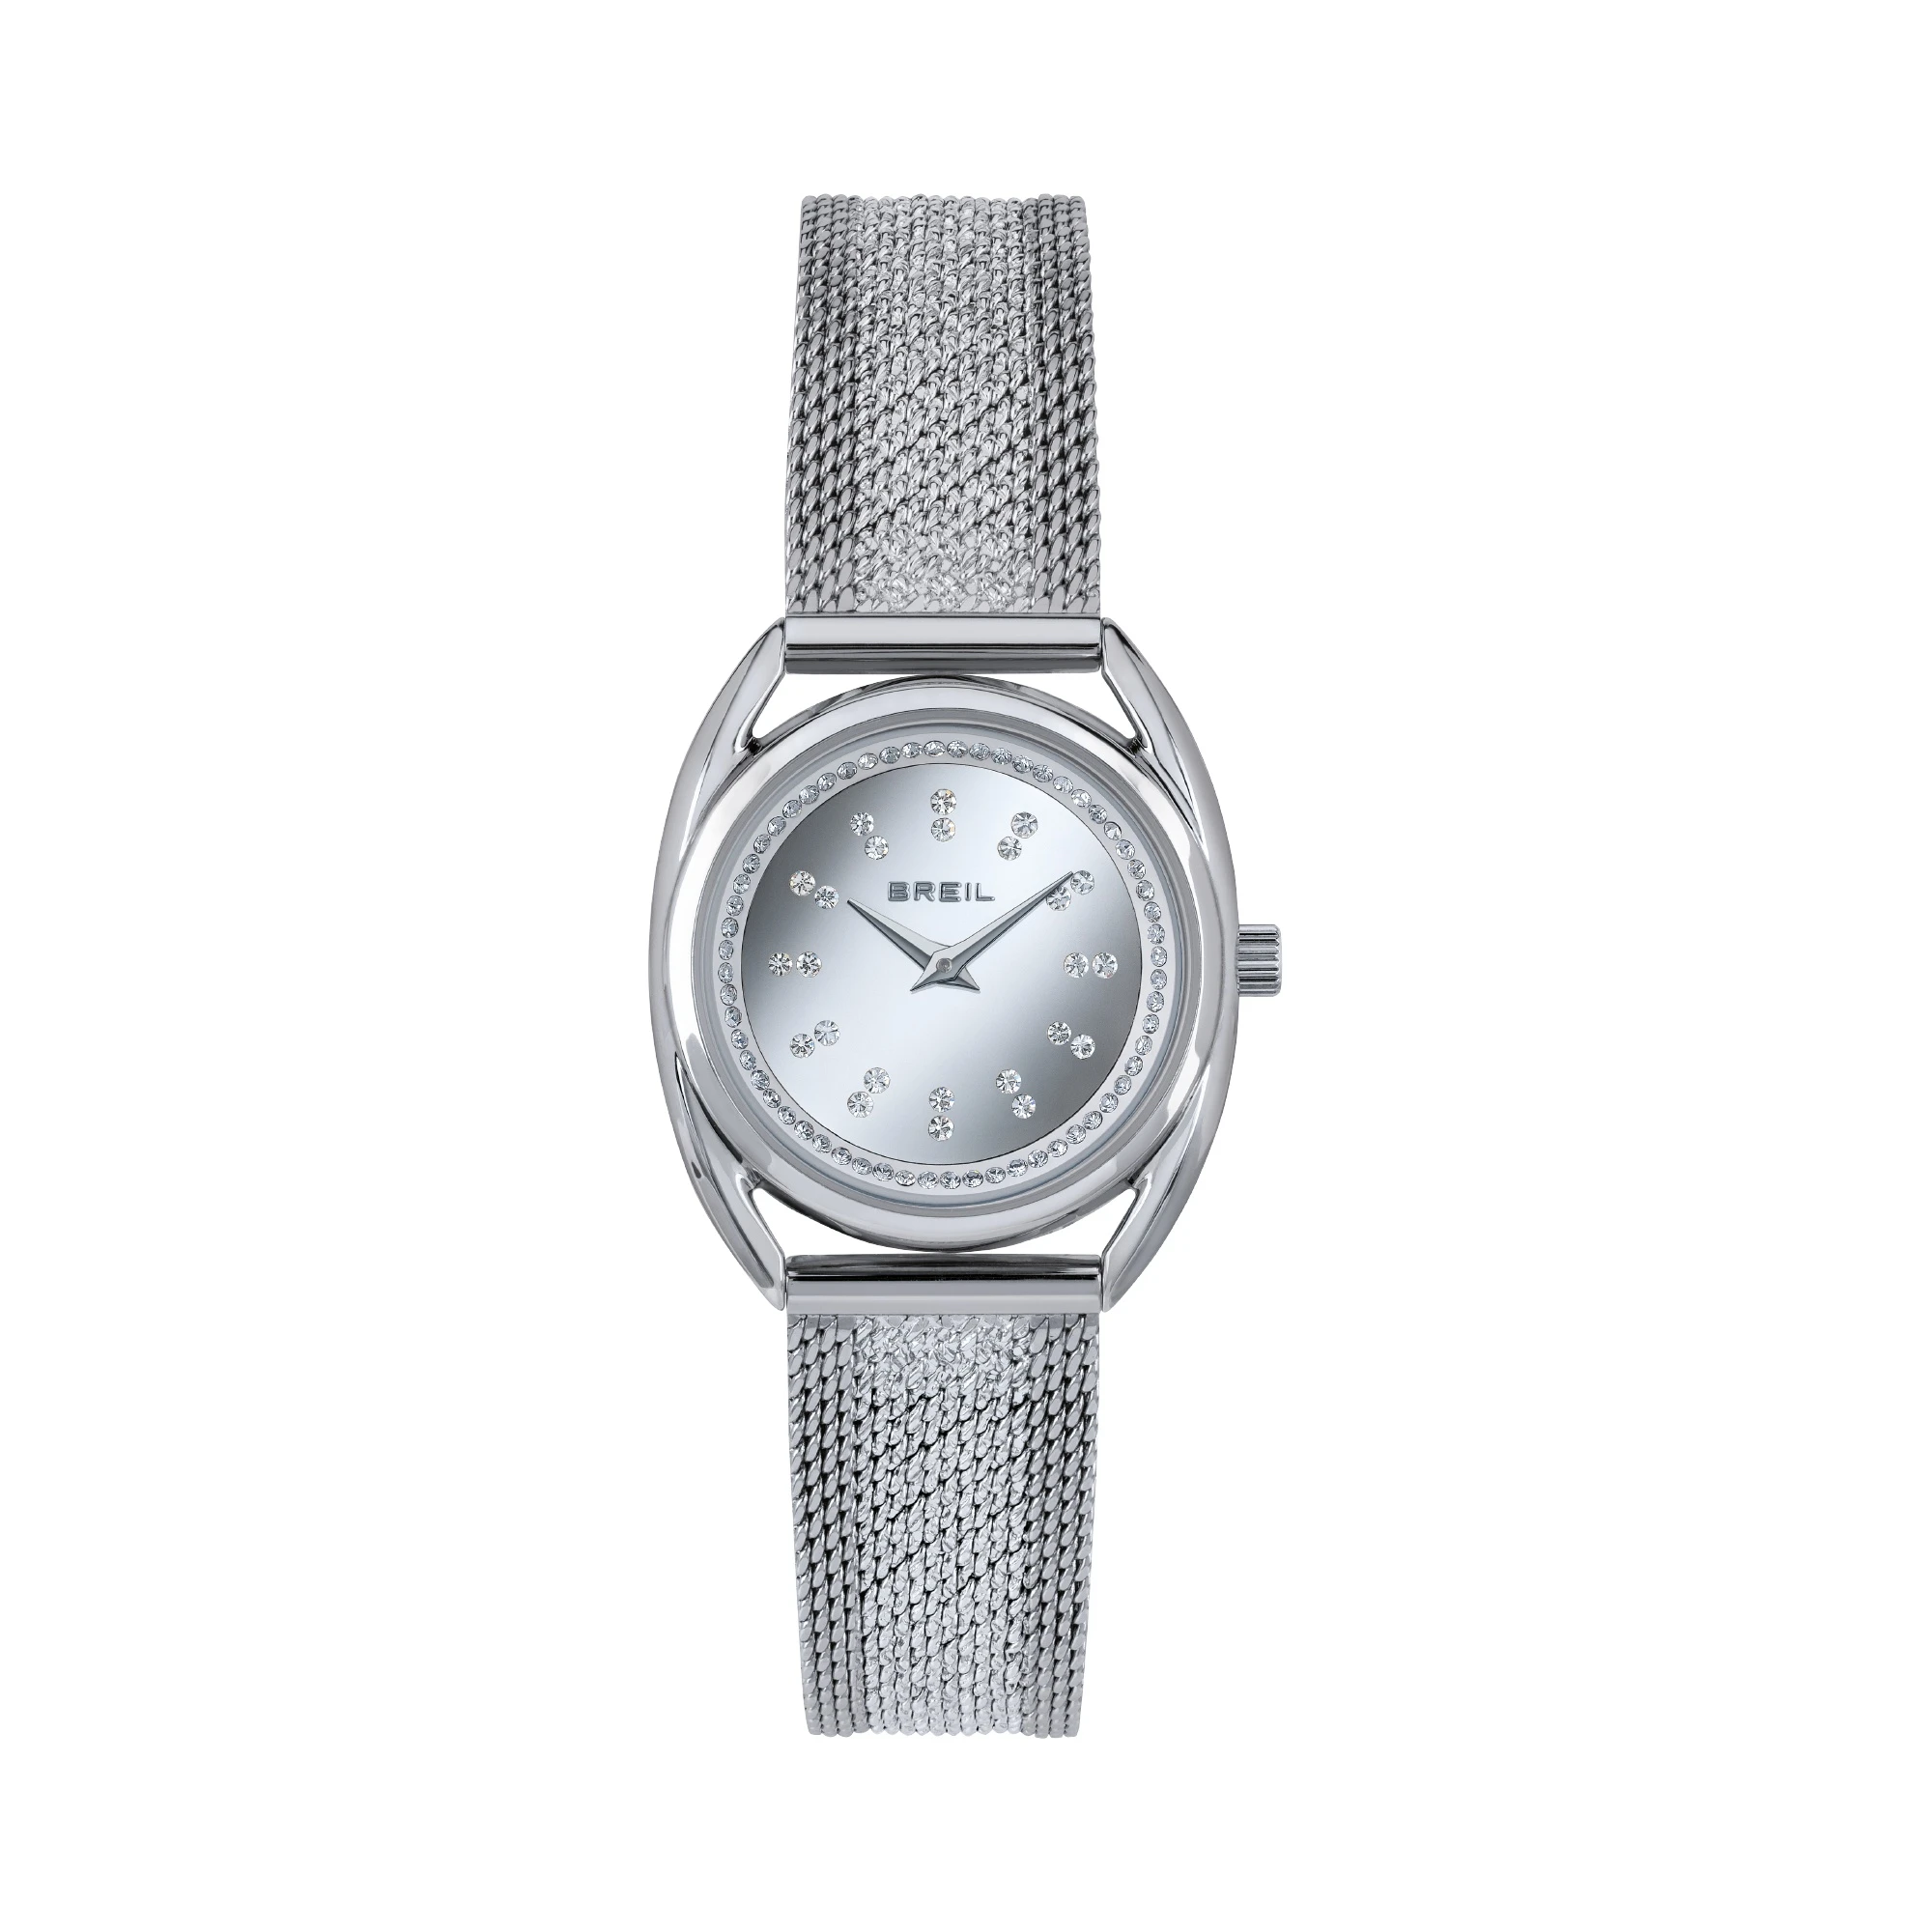 PETIT CHARME - TIME ONLY DAME 28 MM - 1 - TW1894 | Breil